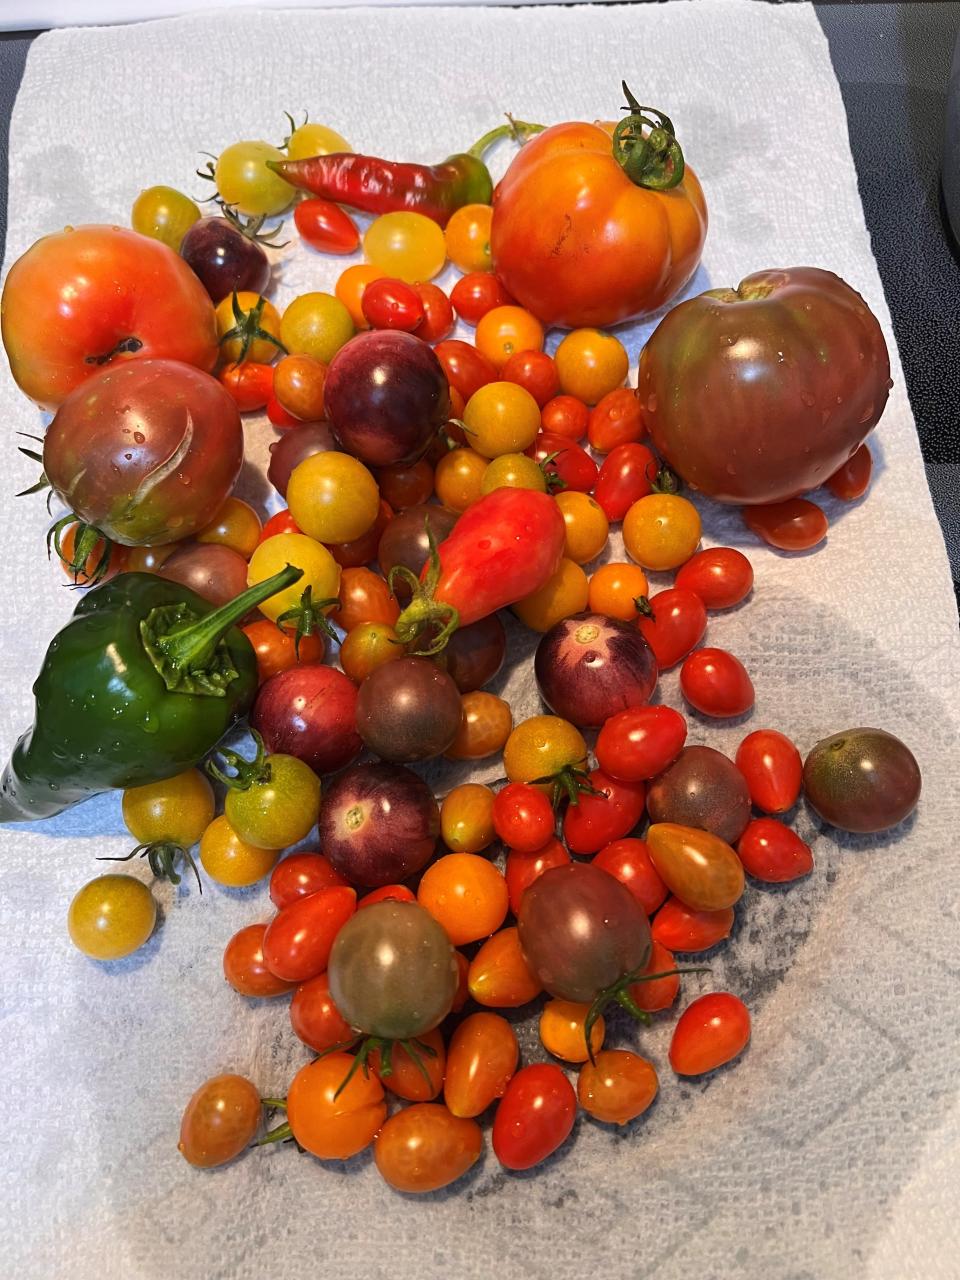 A bounty from the garden of Laurie Mattingly, whose home is part of the "Experience Memphis Gardens" tour.